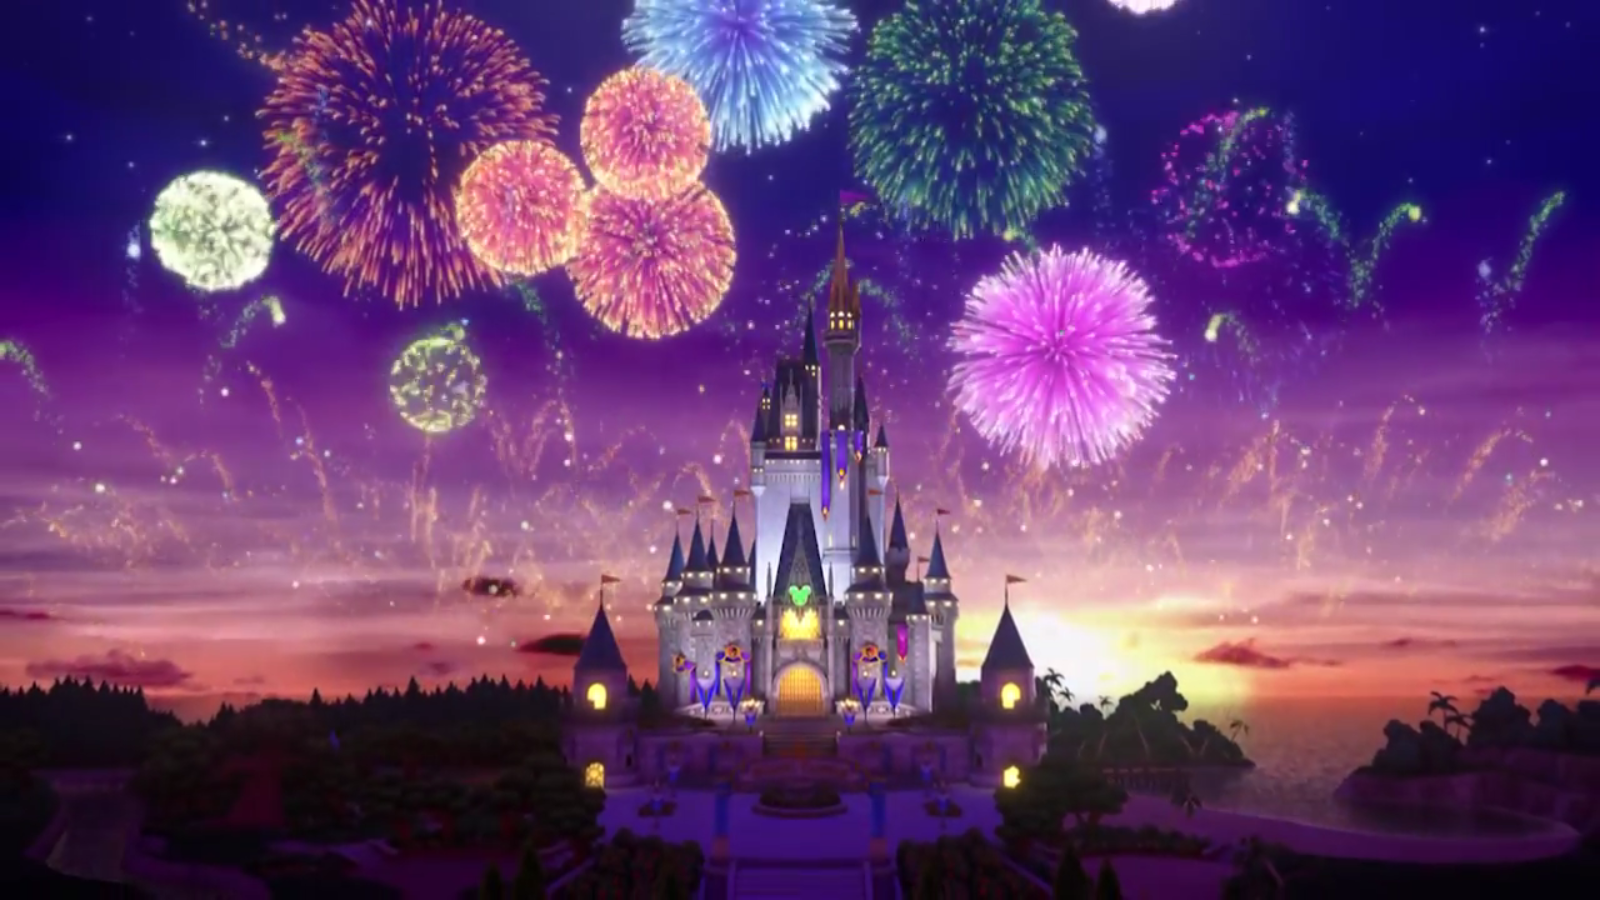 disney world gave you a free ticket (with one paying adult) to the magic kingdom